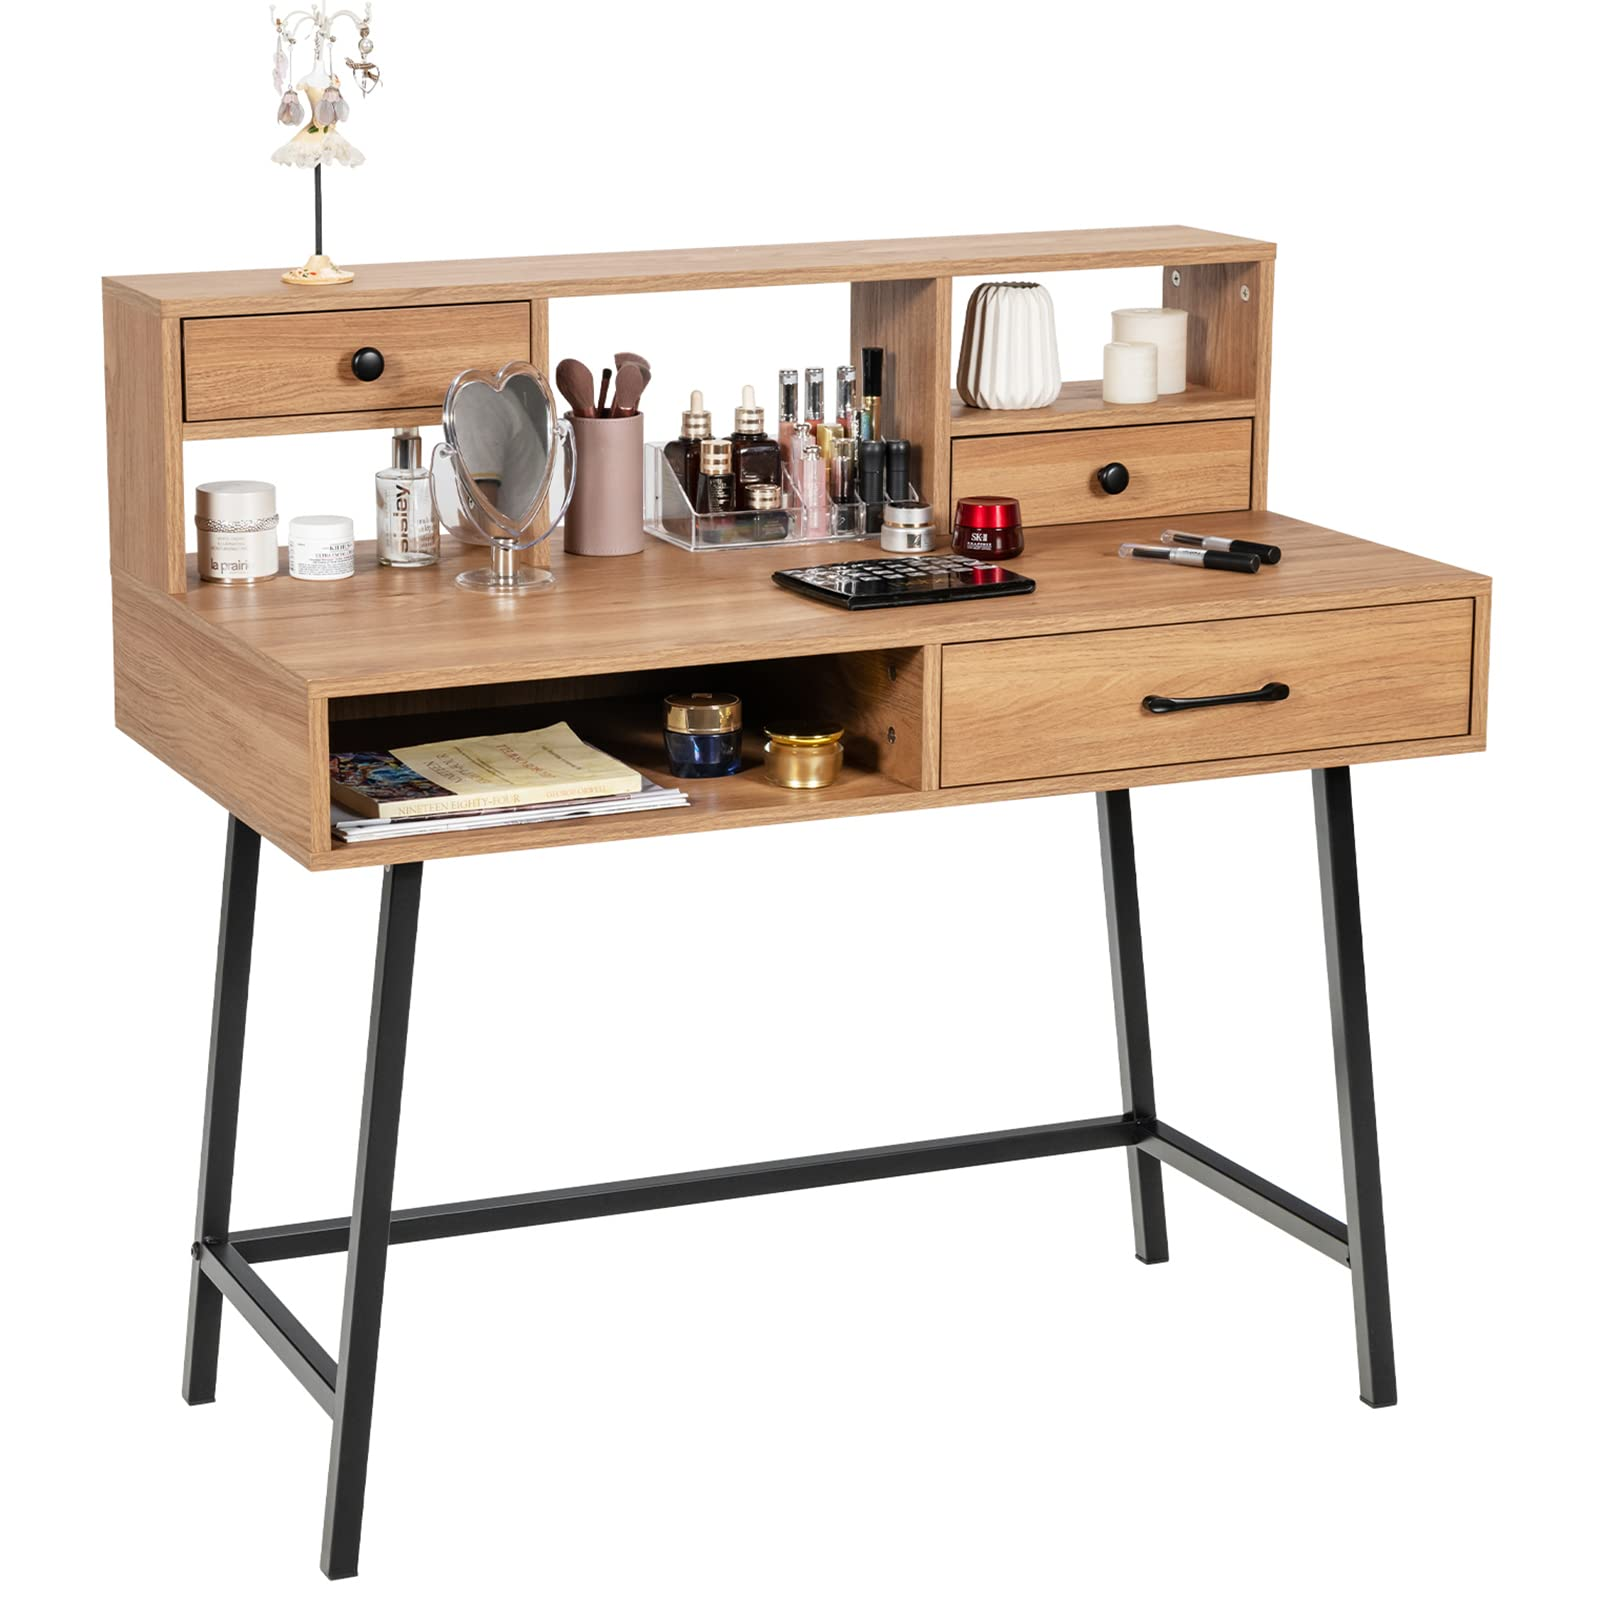 CHARMAID 42'' Vanity Table with Large Drawer, 2 Small Drawers, Desktop Shelf